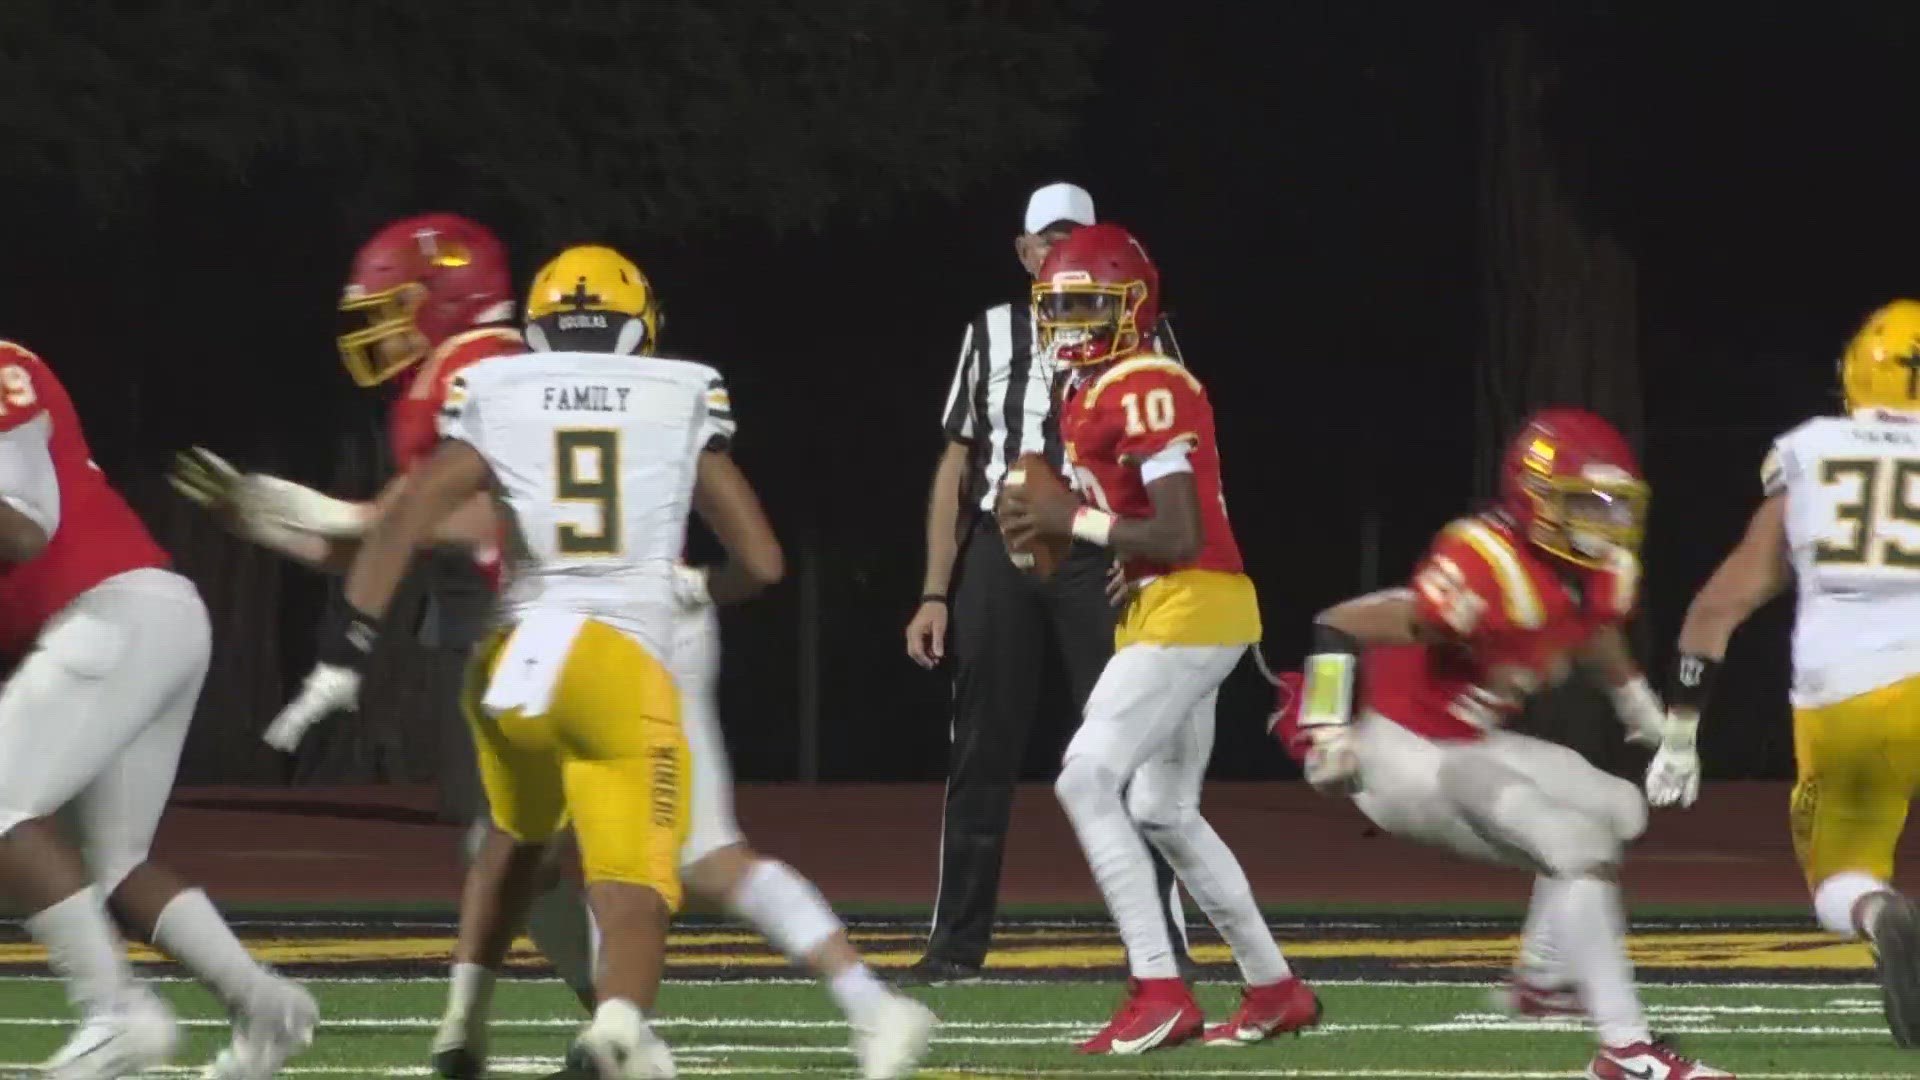 ABC10's Kevin John takes us through week 2 highlights of great High School Football